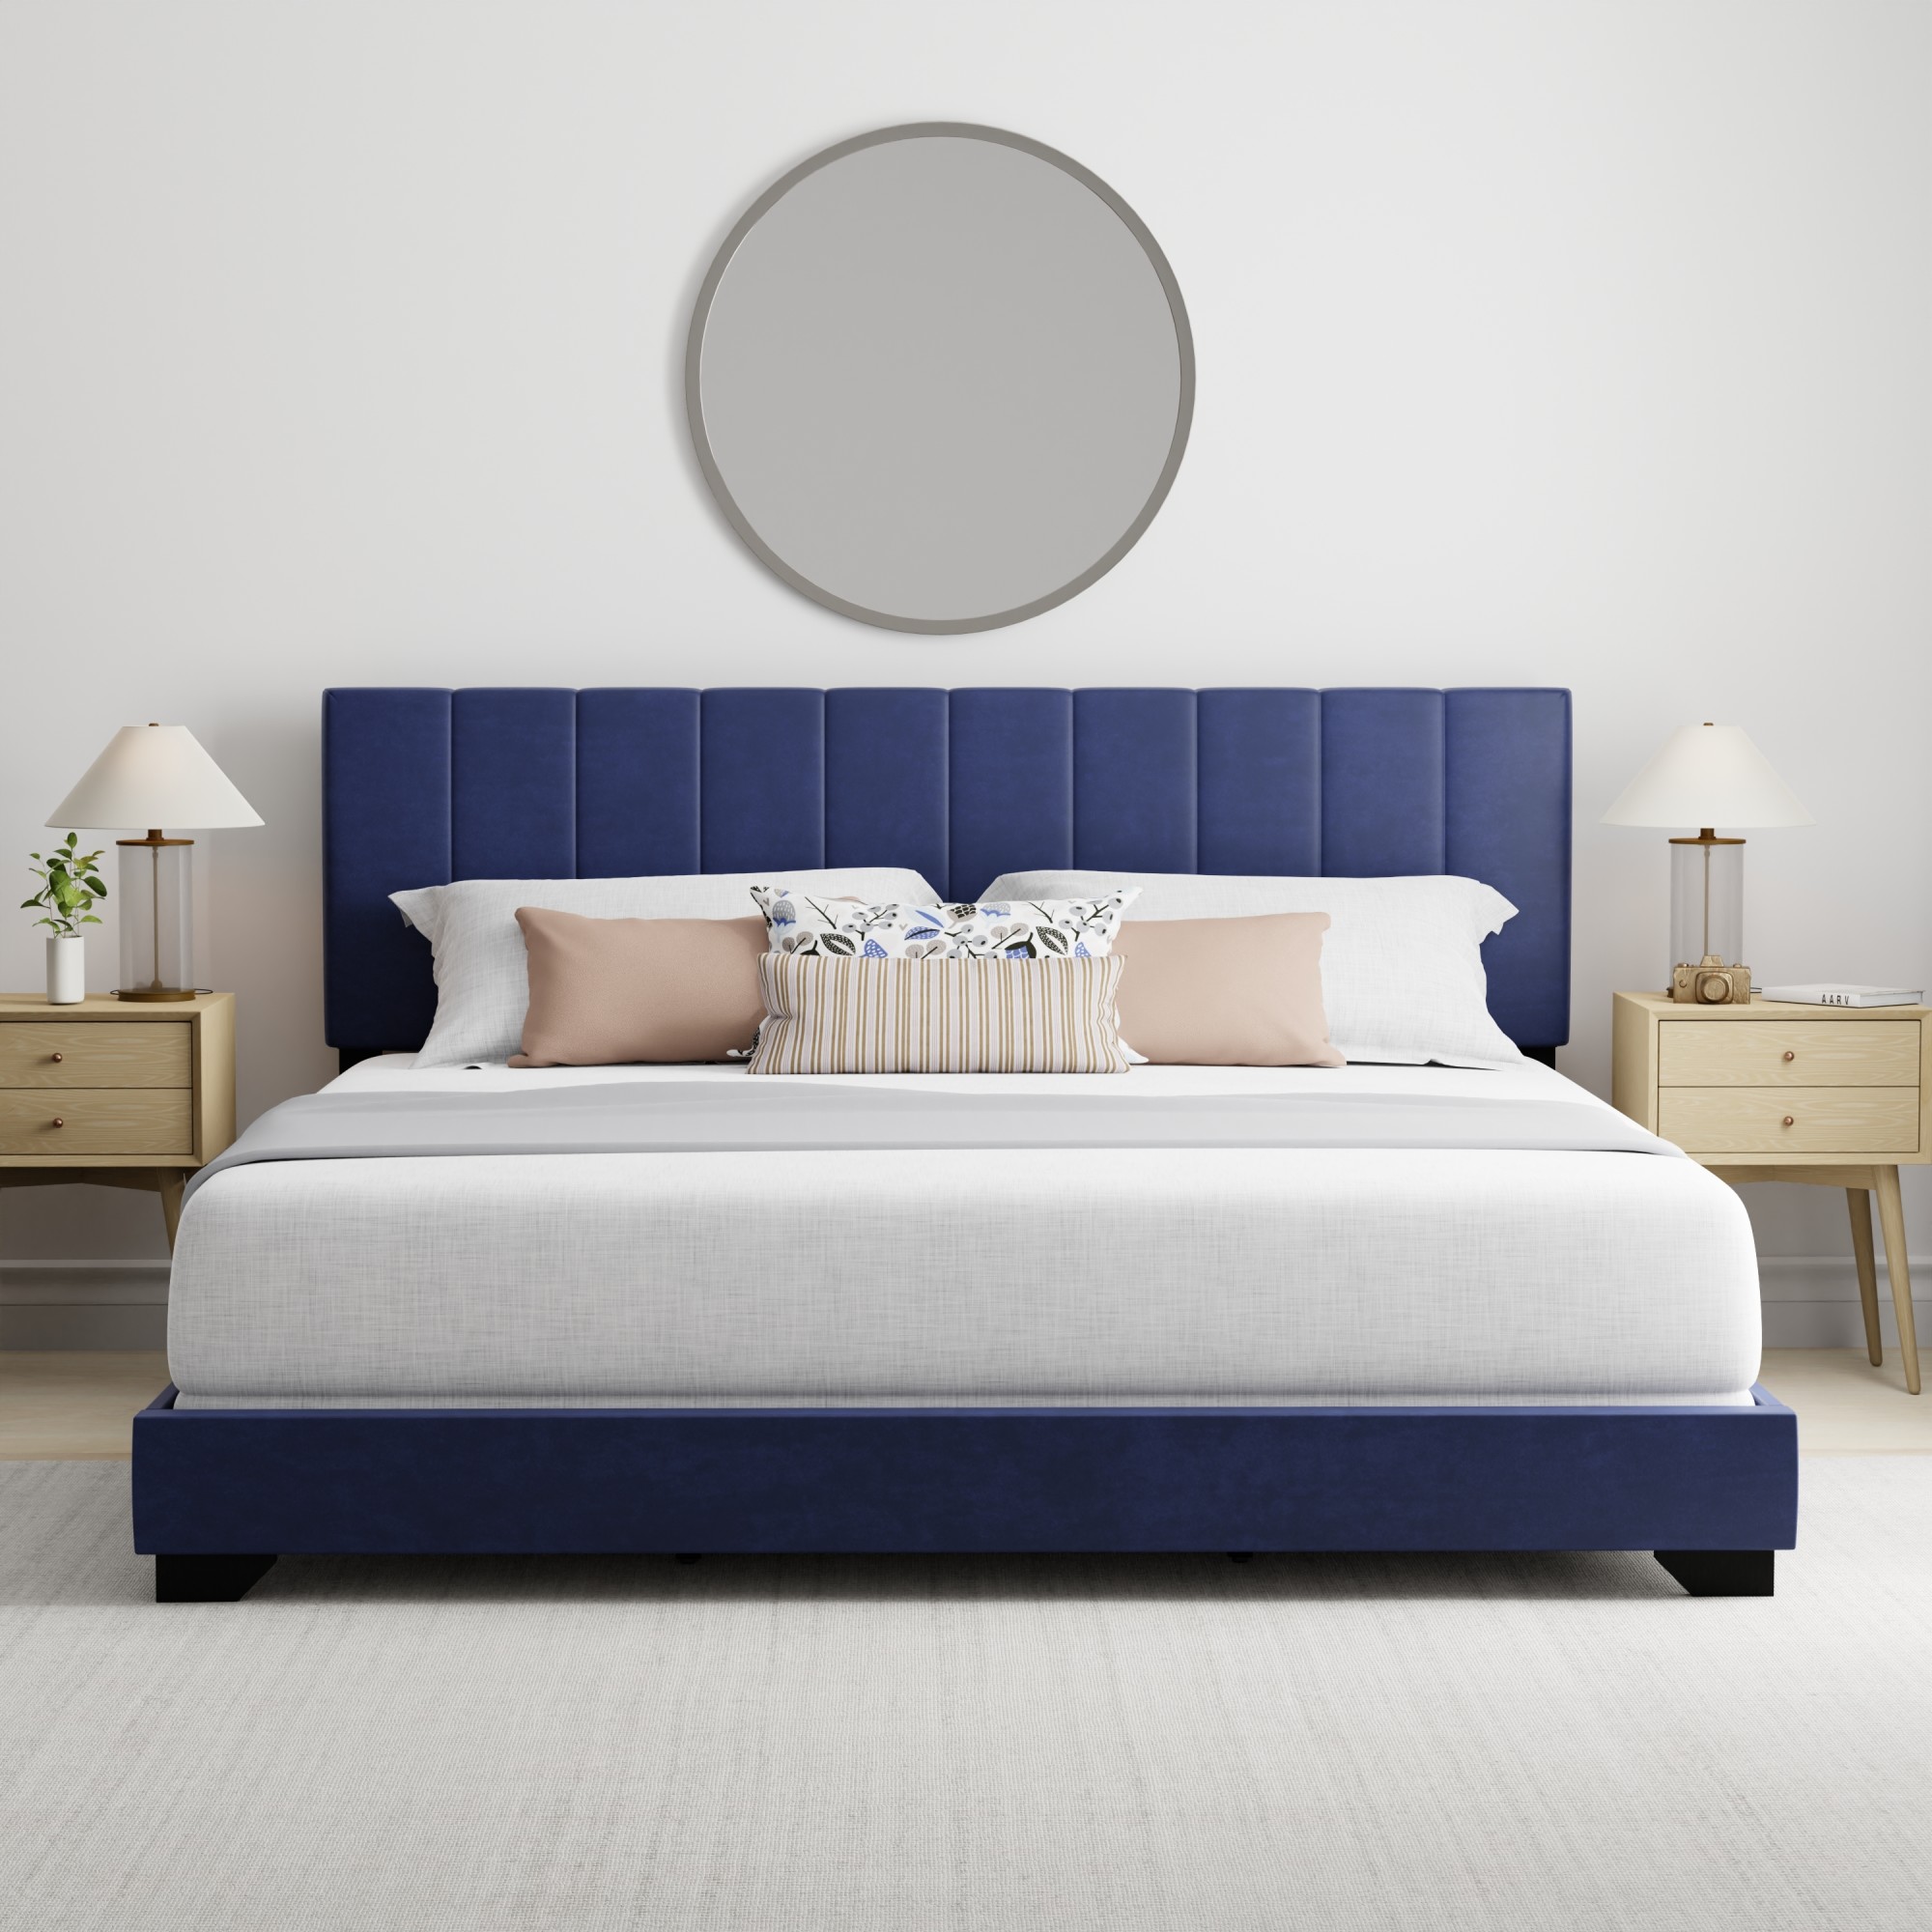 Reece Channel Stitched Upholstered King Bed, Sapphire, by Hillsdale Living Essentials - image 3 of 17